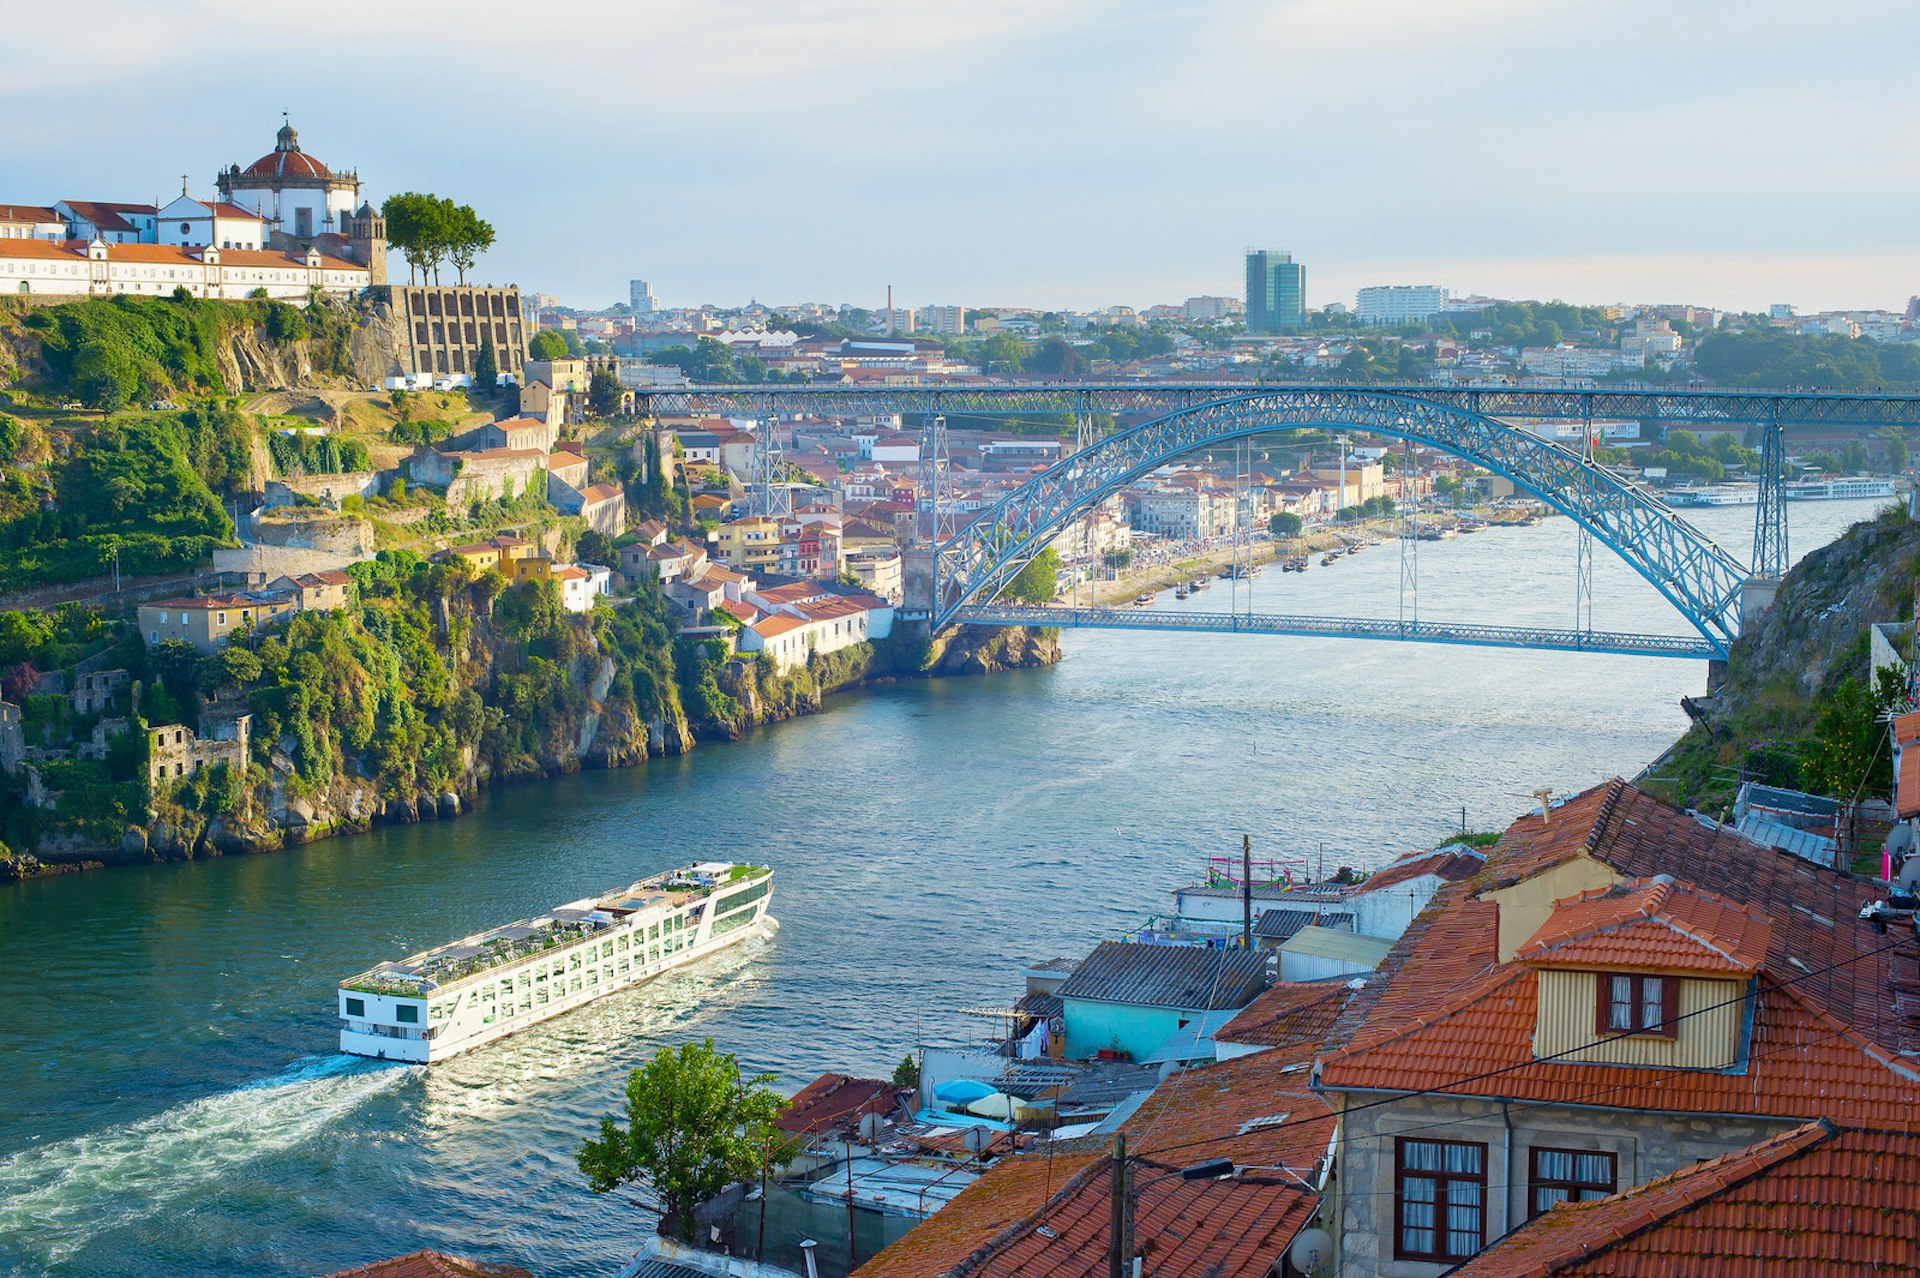 A cruise ship arrives in Porto on the River Douro